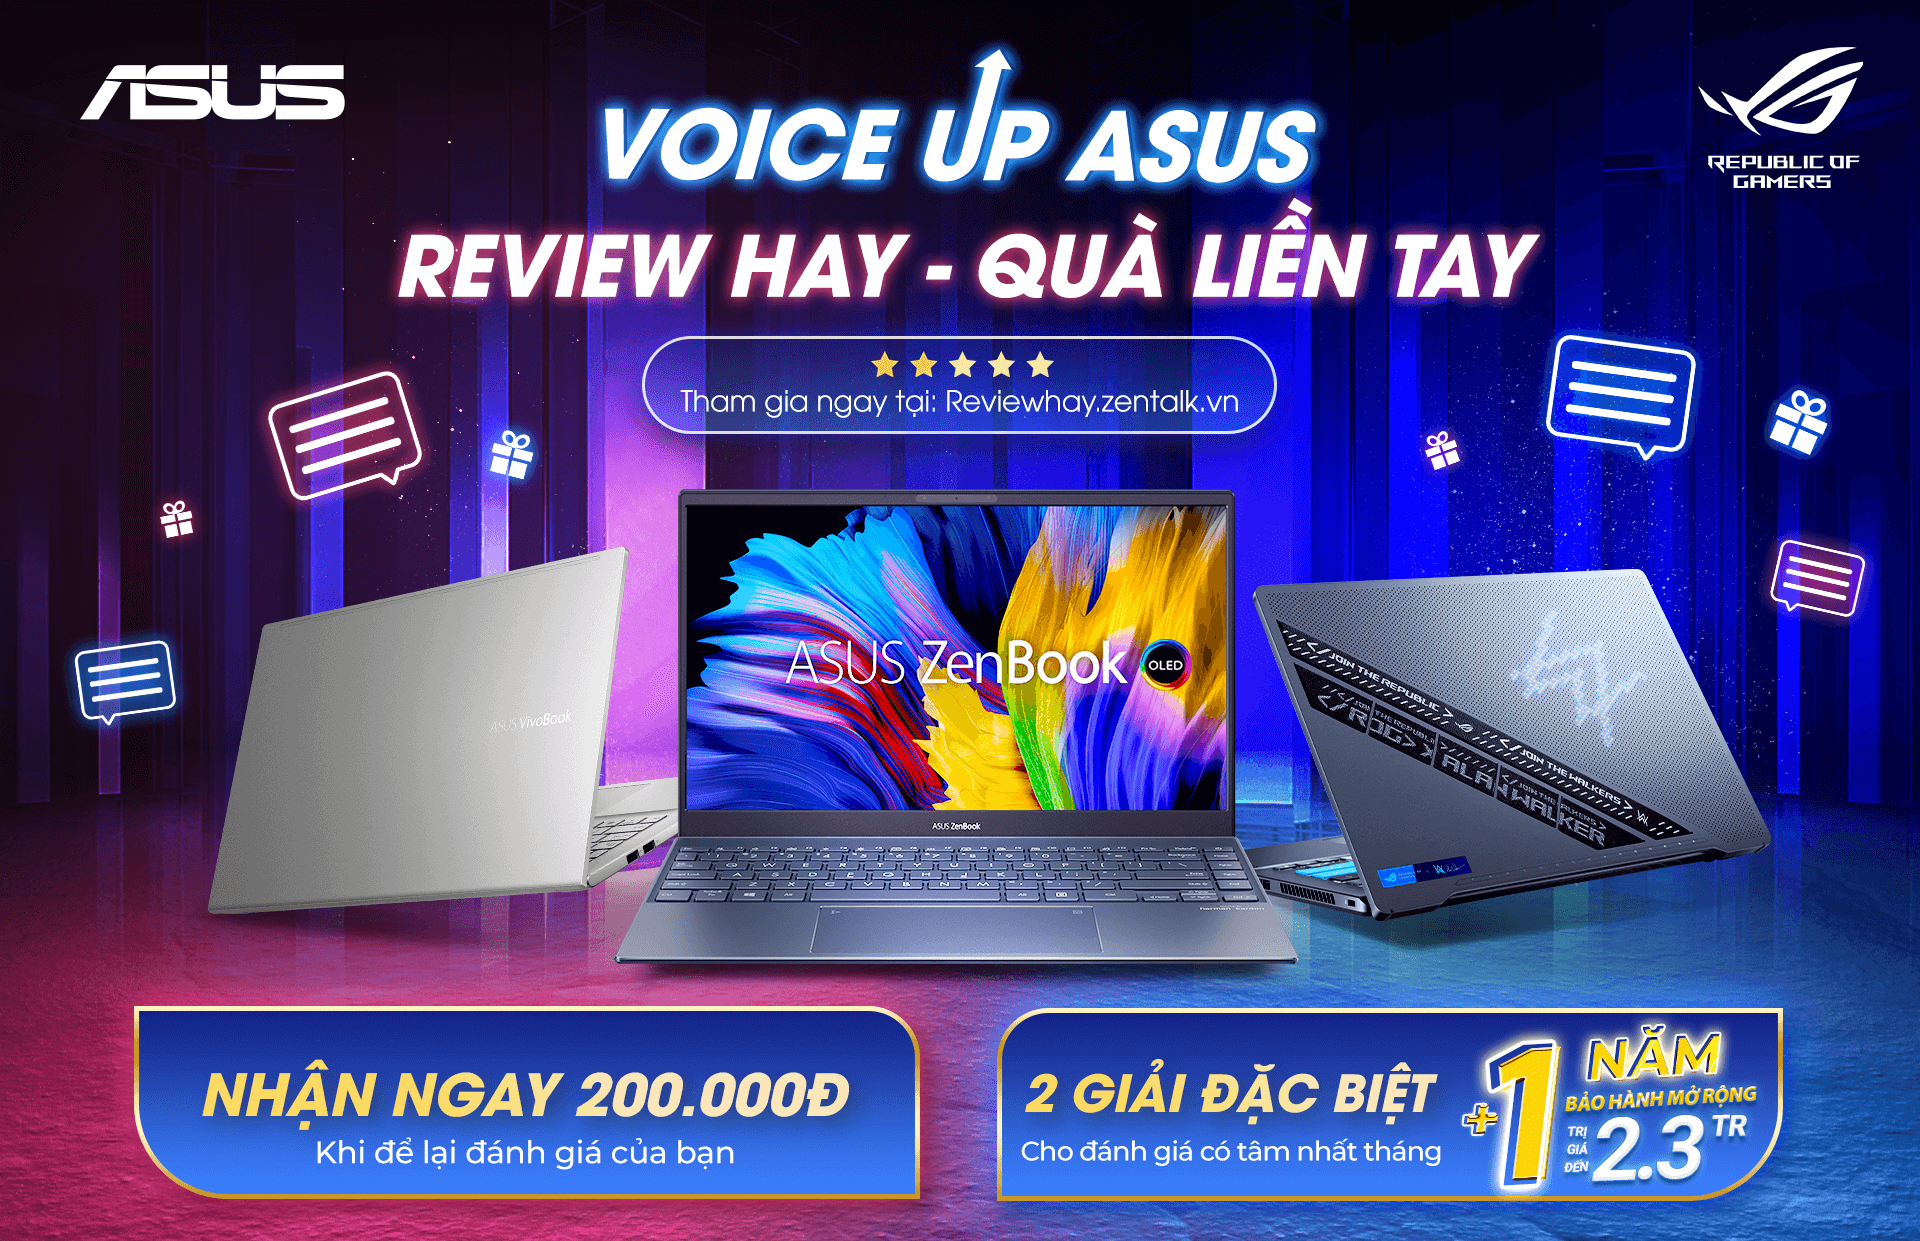 VOICE UP ASUS - REVIEW HAY QUÀ LIỀN TAY